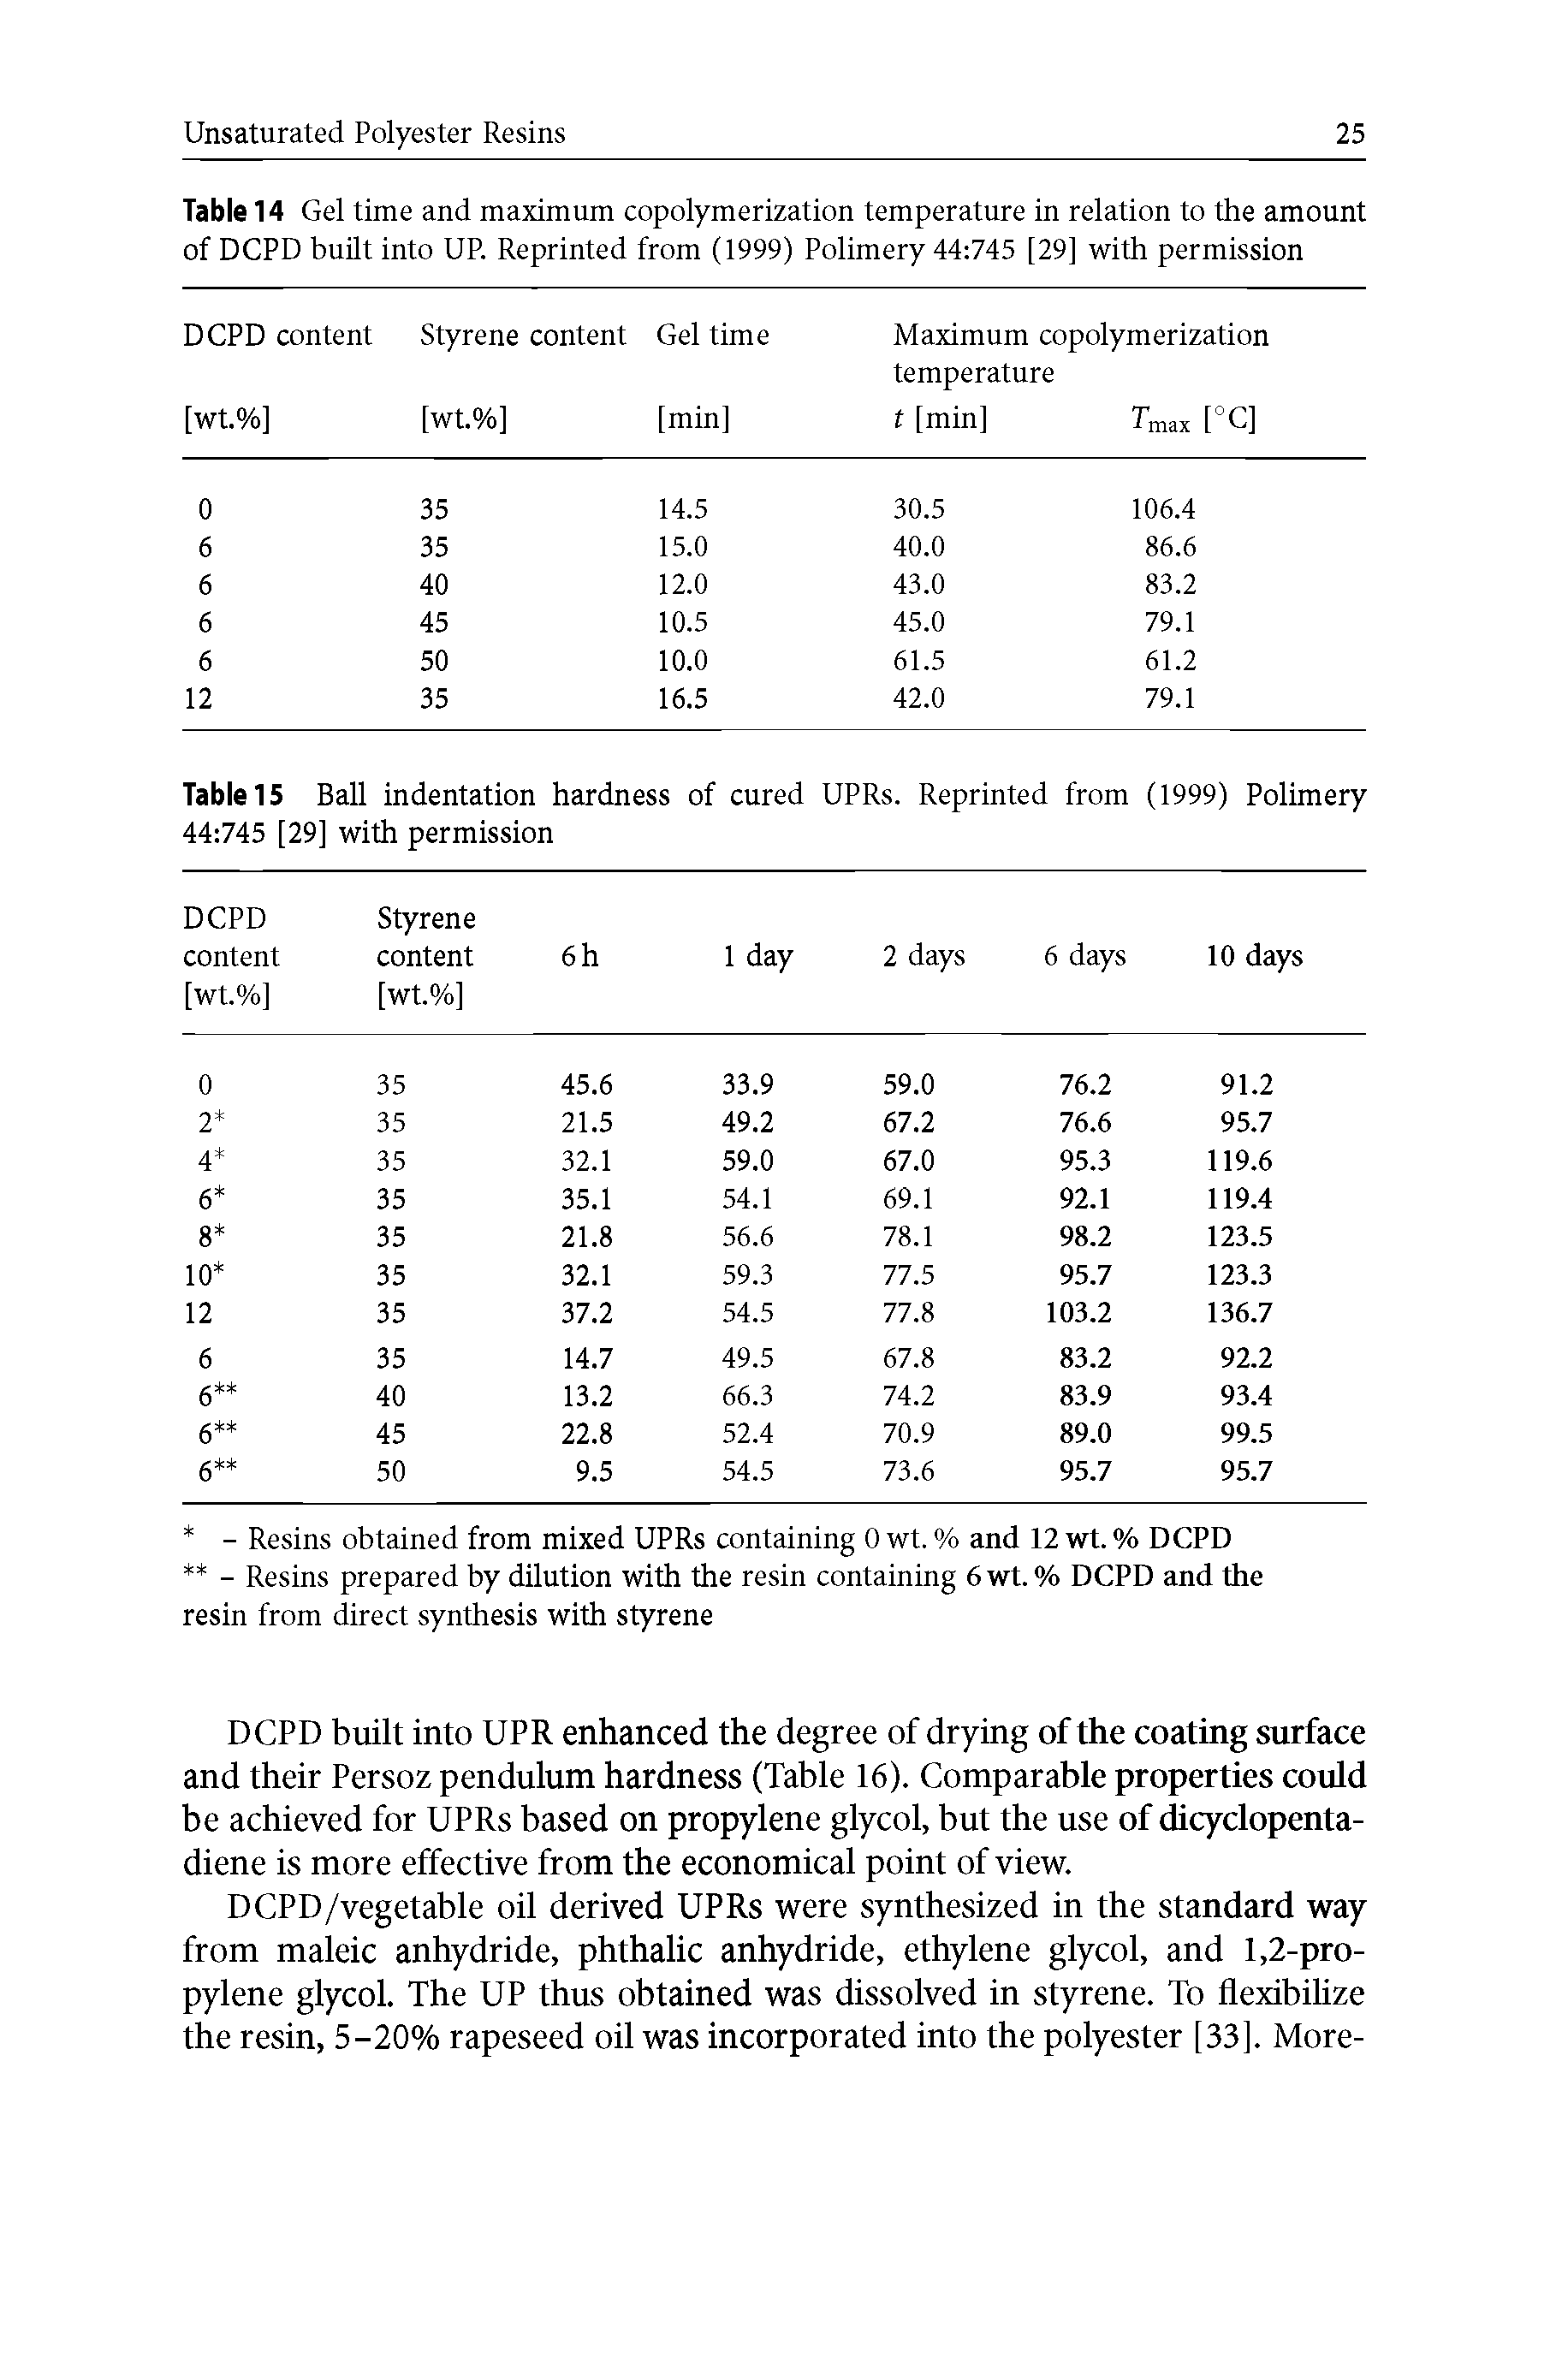 Table 14 Gel time and maximum copolymerization temperature in relation to the amount of DCPD built into UP. Reprinted from (1999) Polimery 44 745 [29] with permission ...